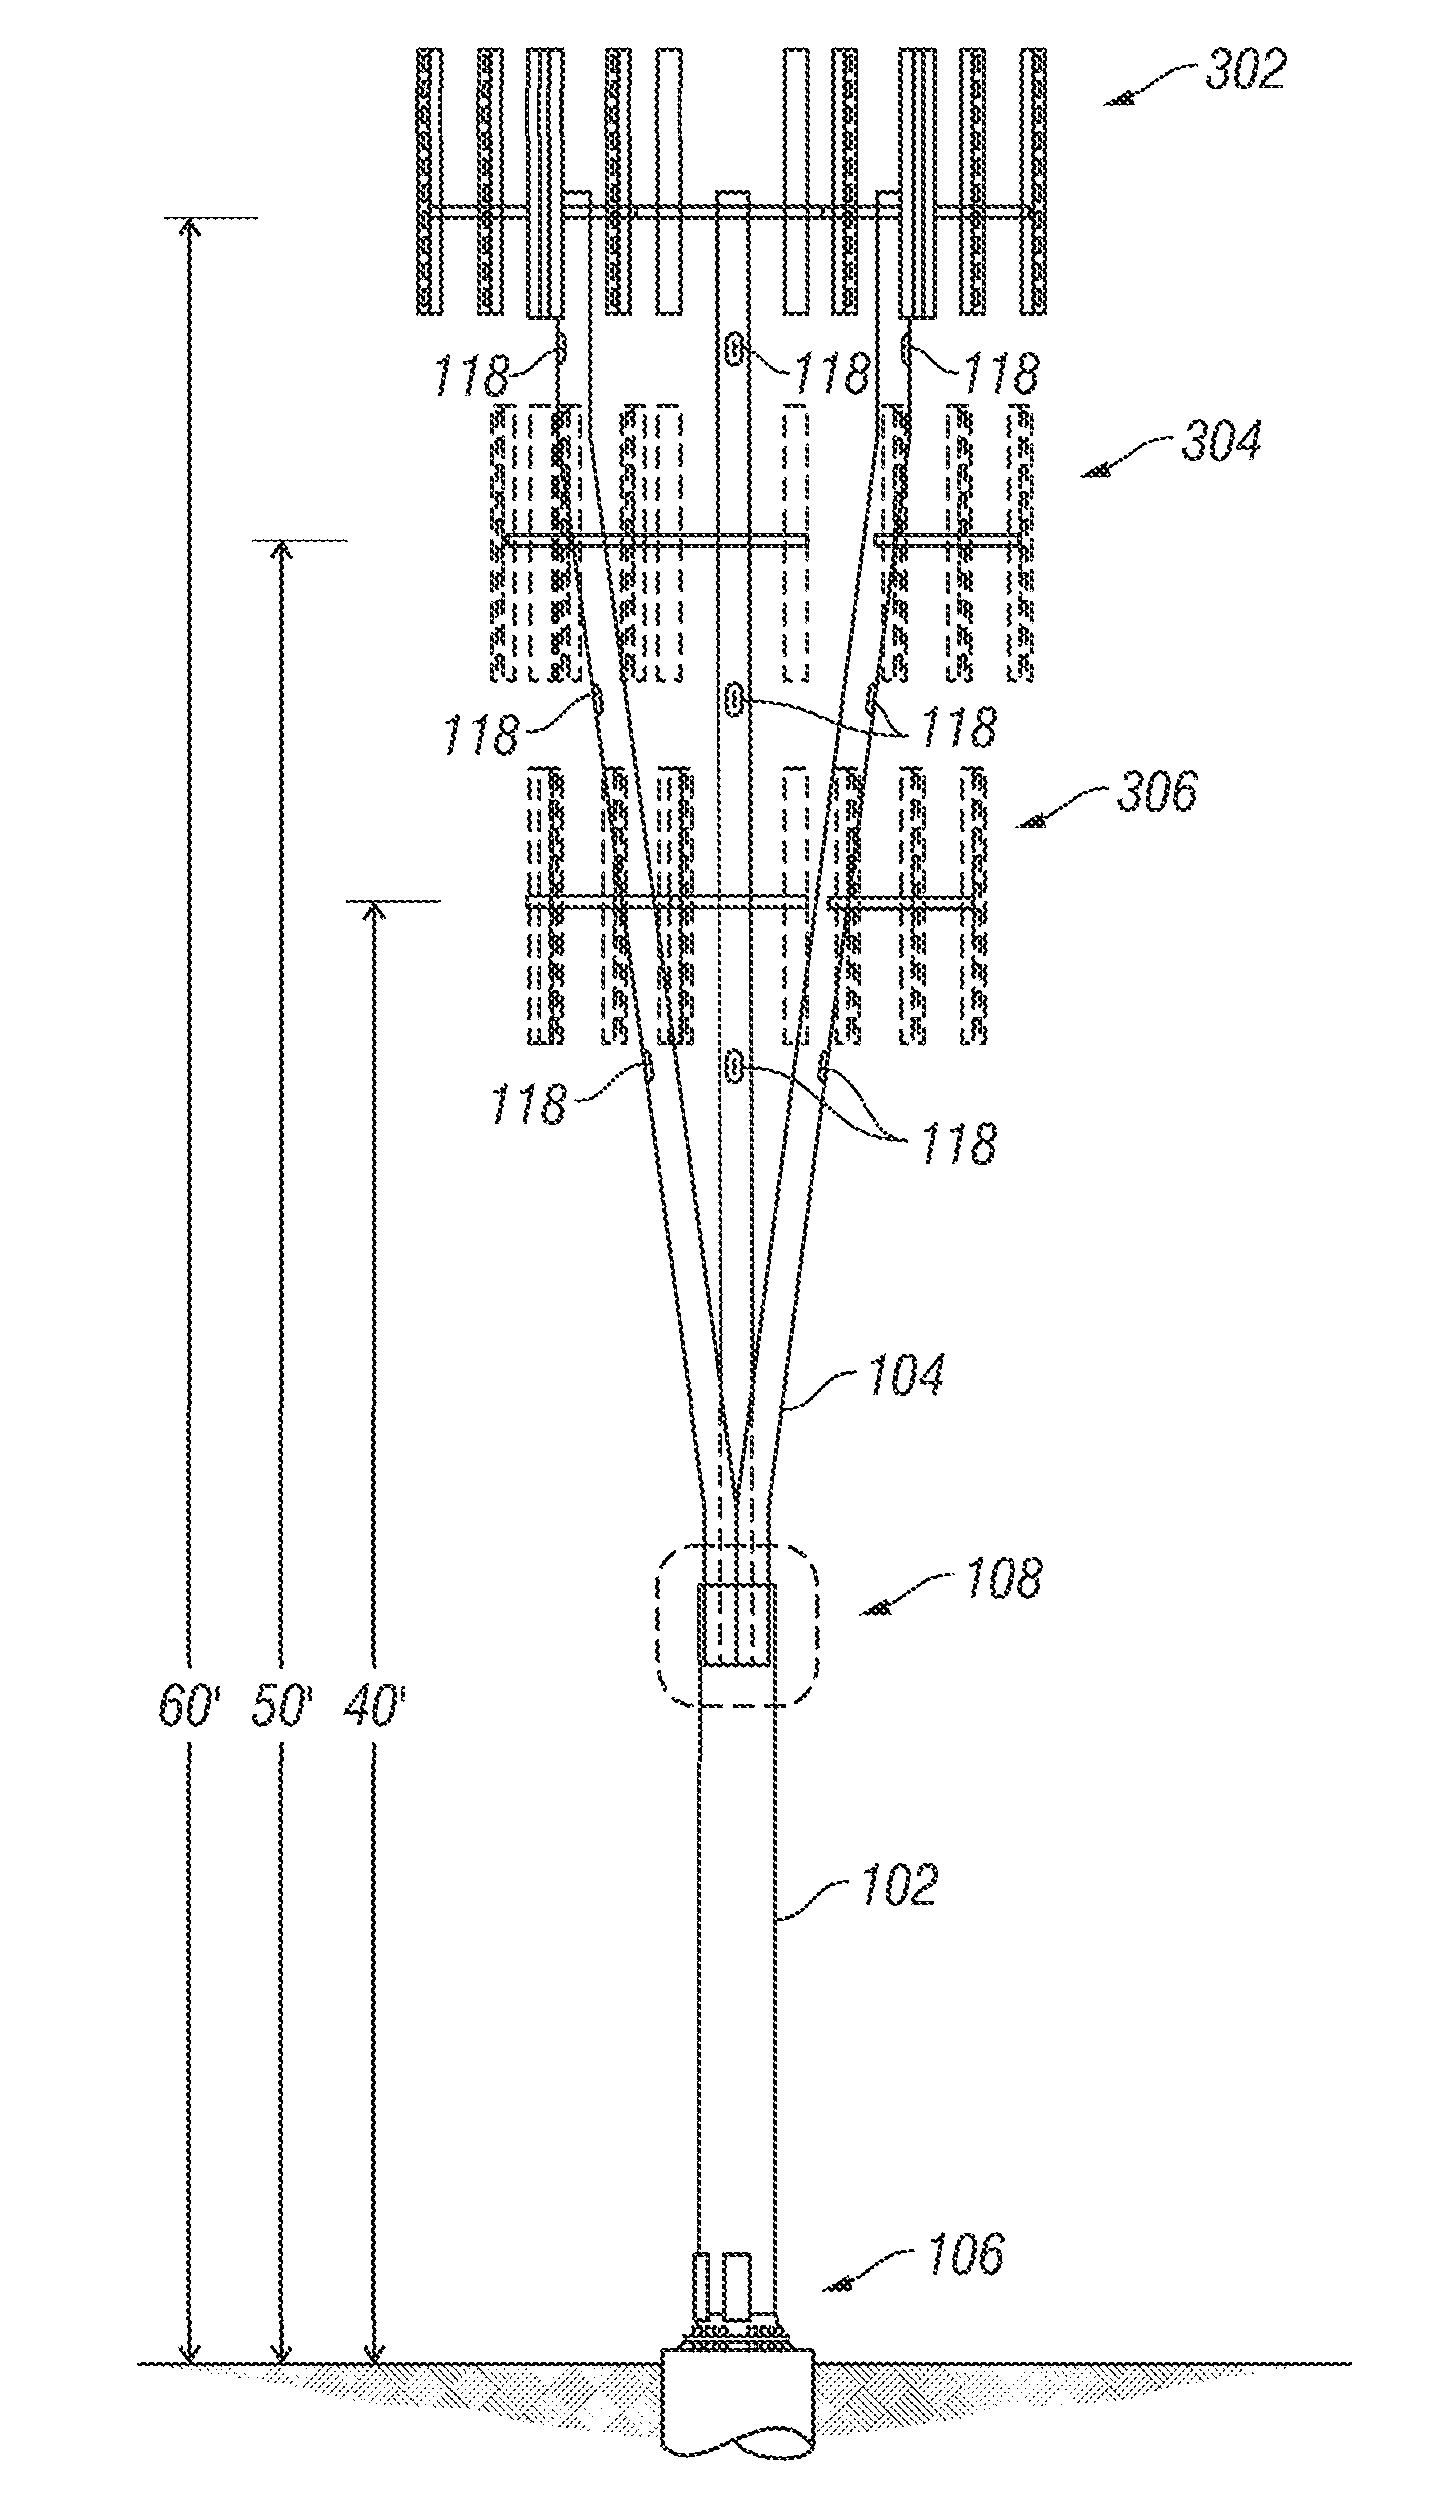 System, Method and Apparatus for Supporting and Concealing Radio Antennas